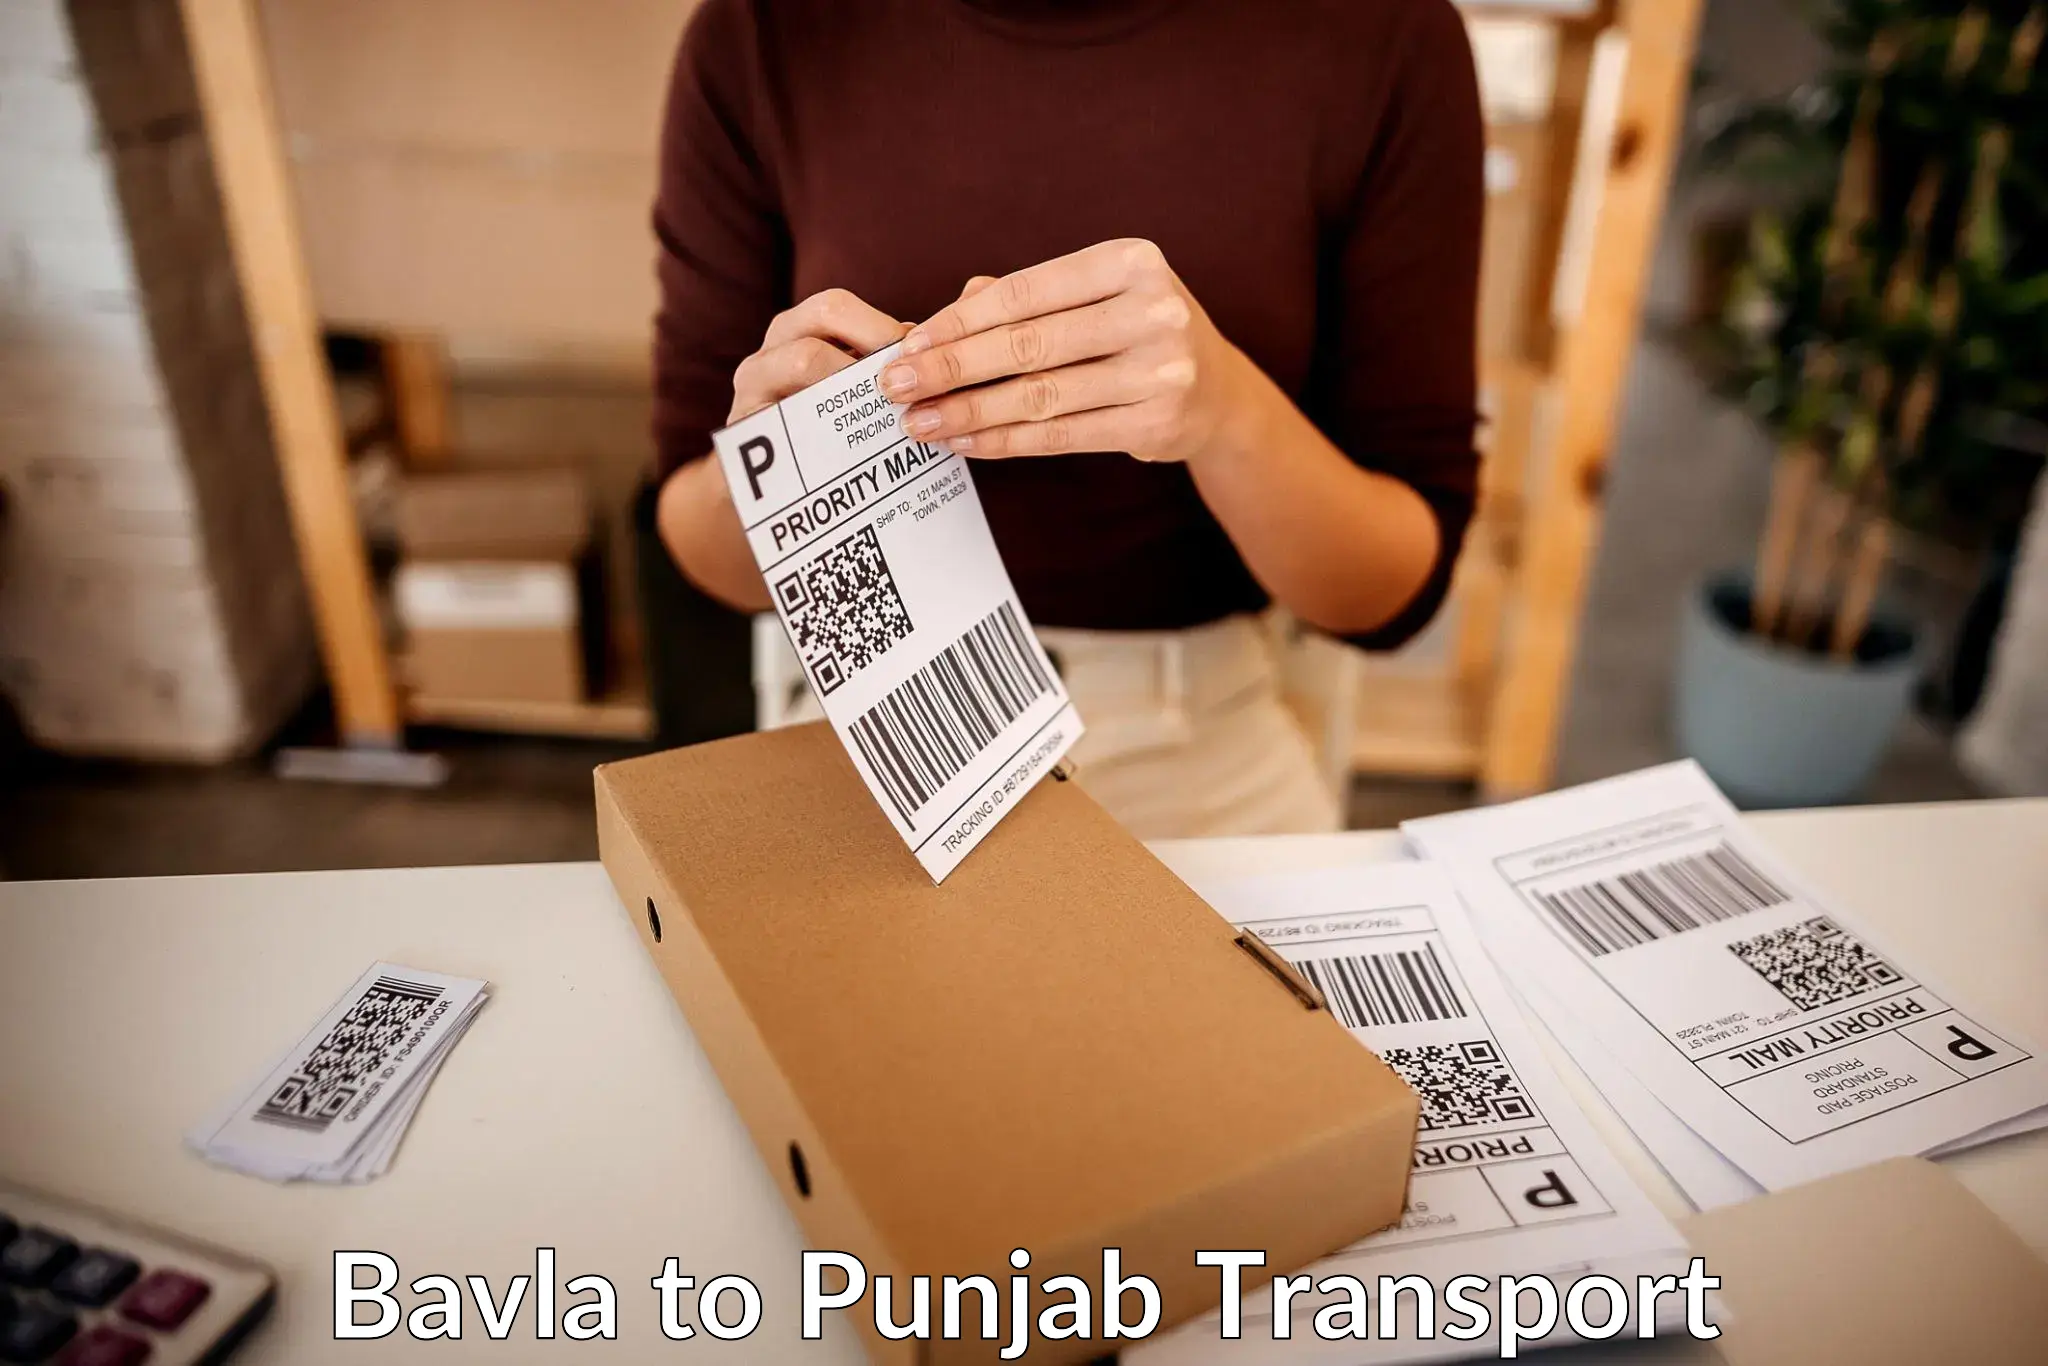 Express transport services Bavla to Sultanpur Lodhi